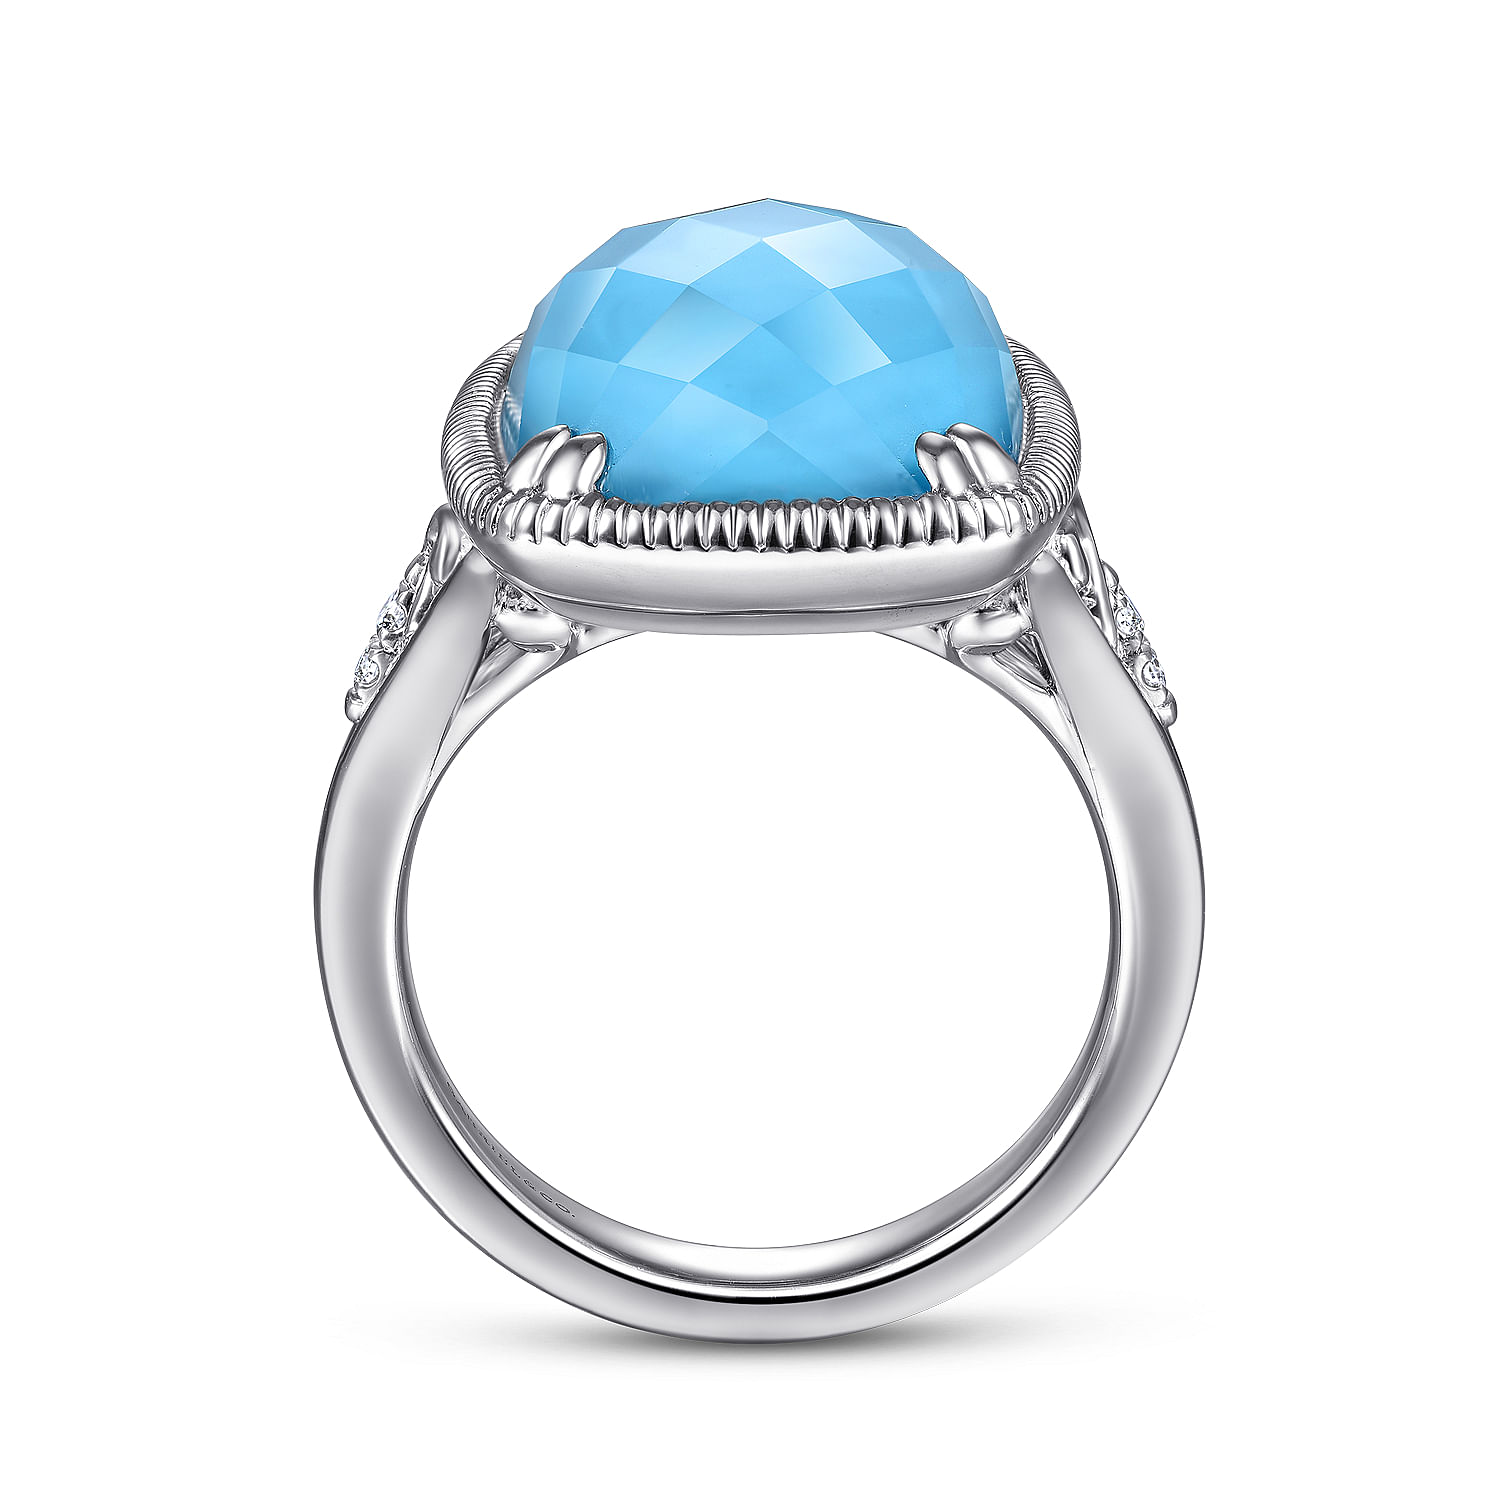 Sterling Silver Rock Crystal/Turquoise Long Cushion Cut Ring